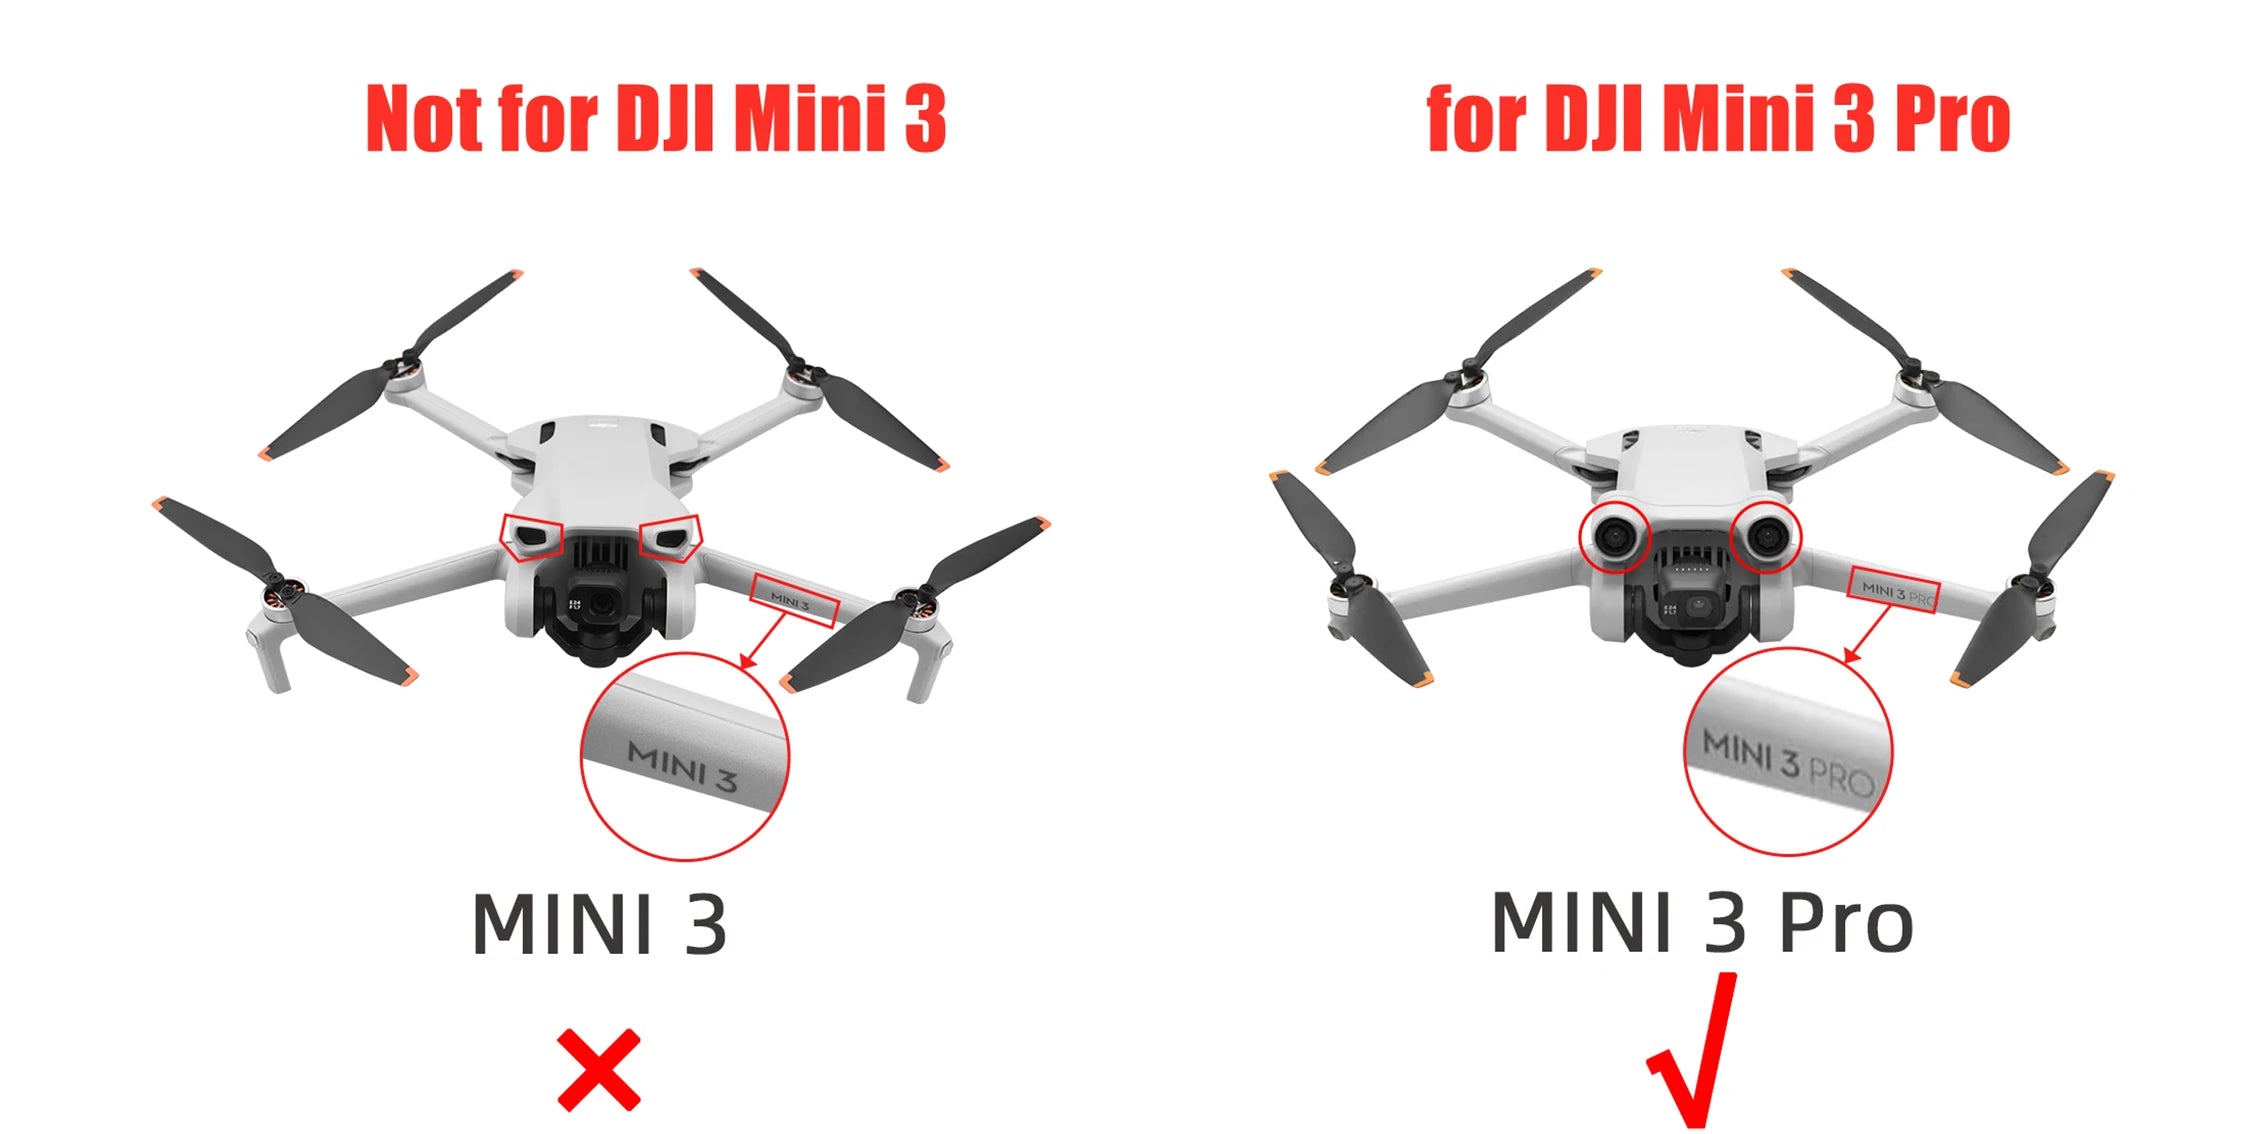 Propeller Guard for DJI Mini 3 Pro, Fix the gimbal to protect the lens from being scratched at all times during